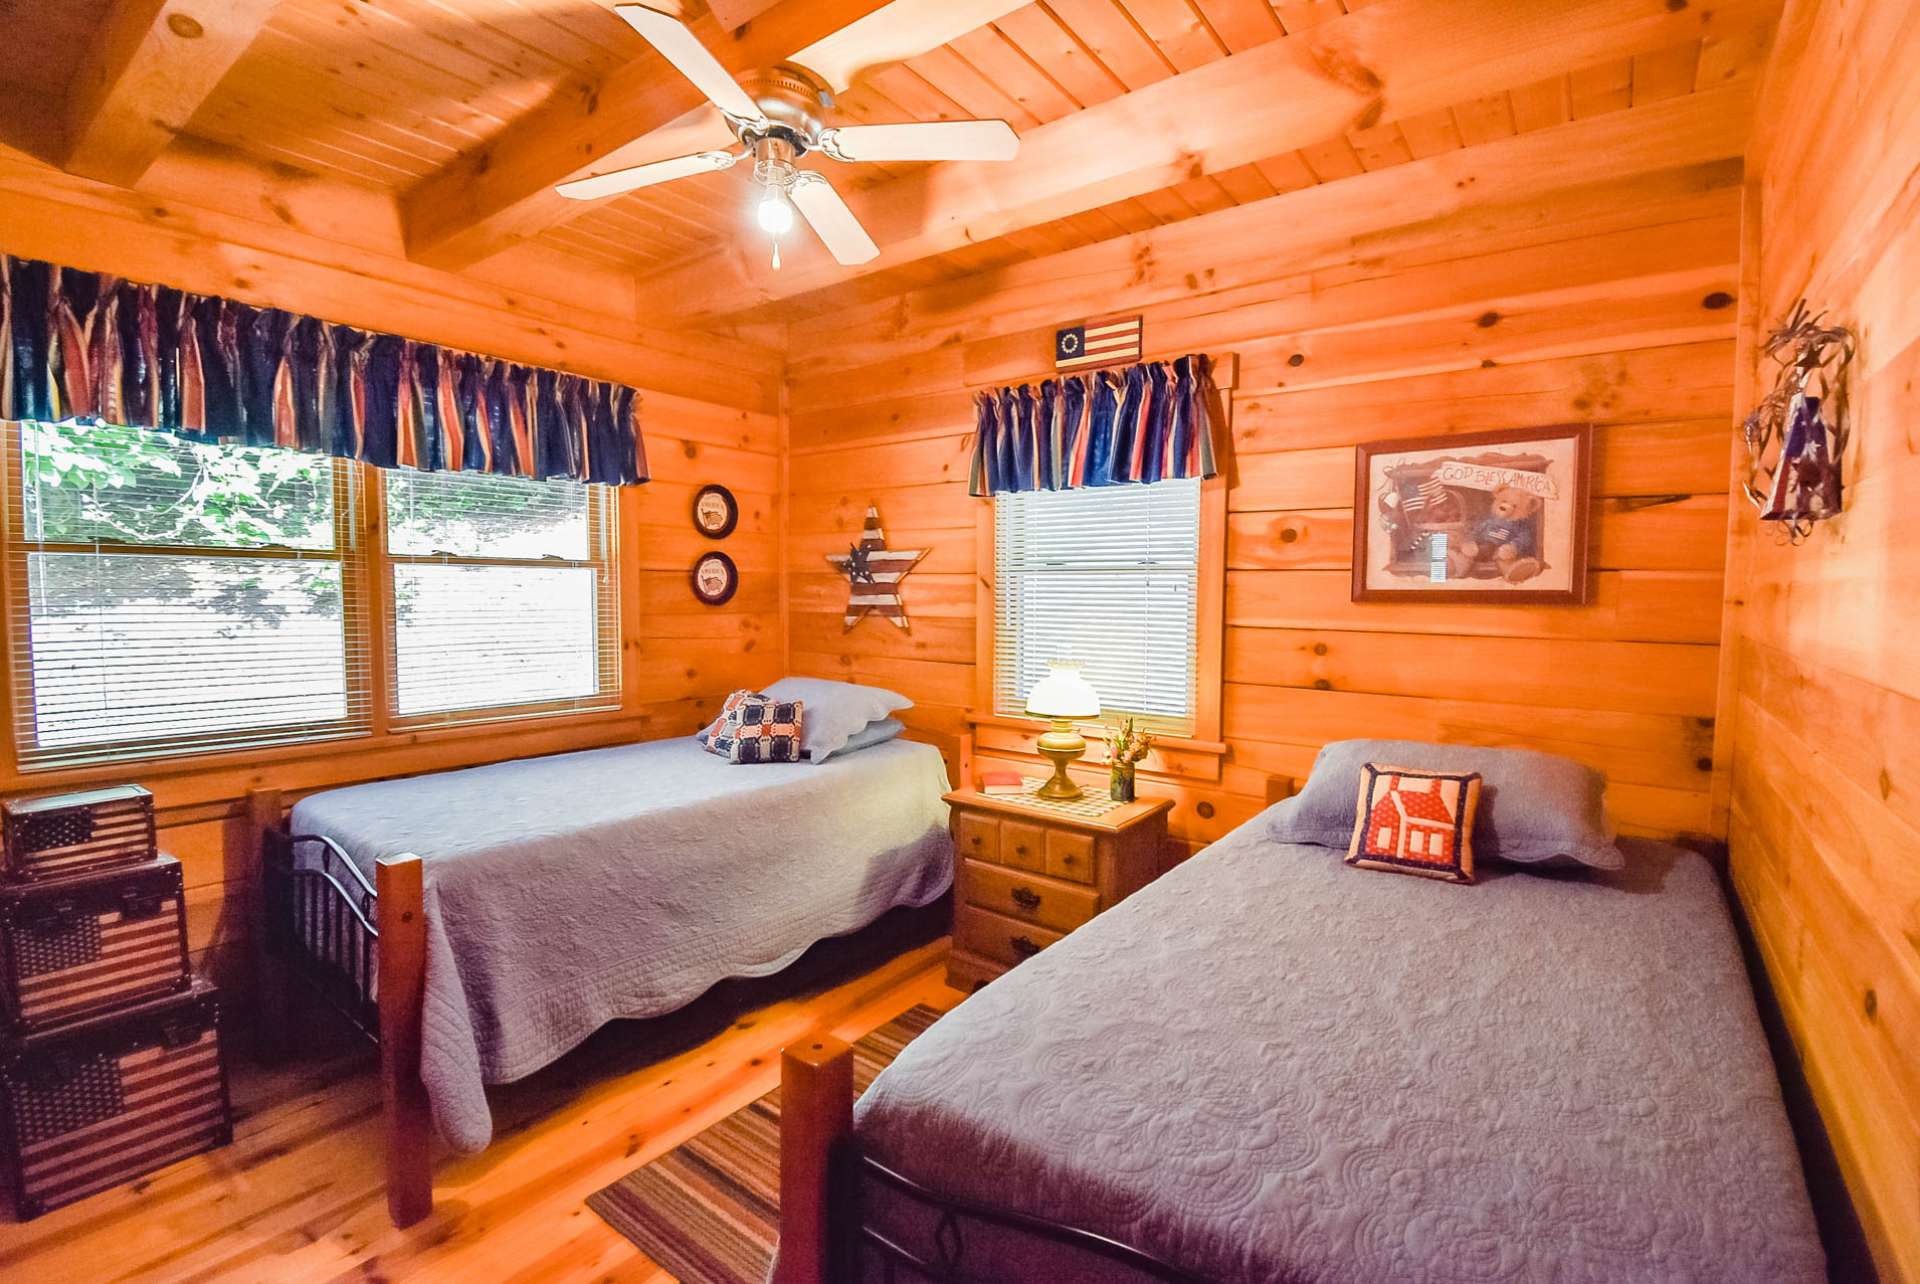 Both main level bedrooms are generously sized and feature exposed beam ceilings.